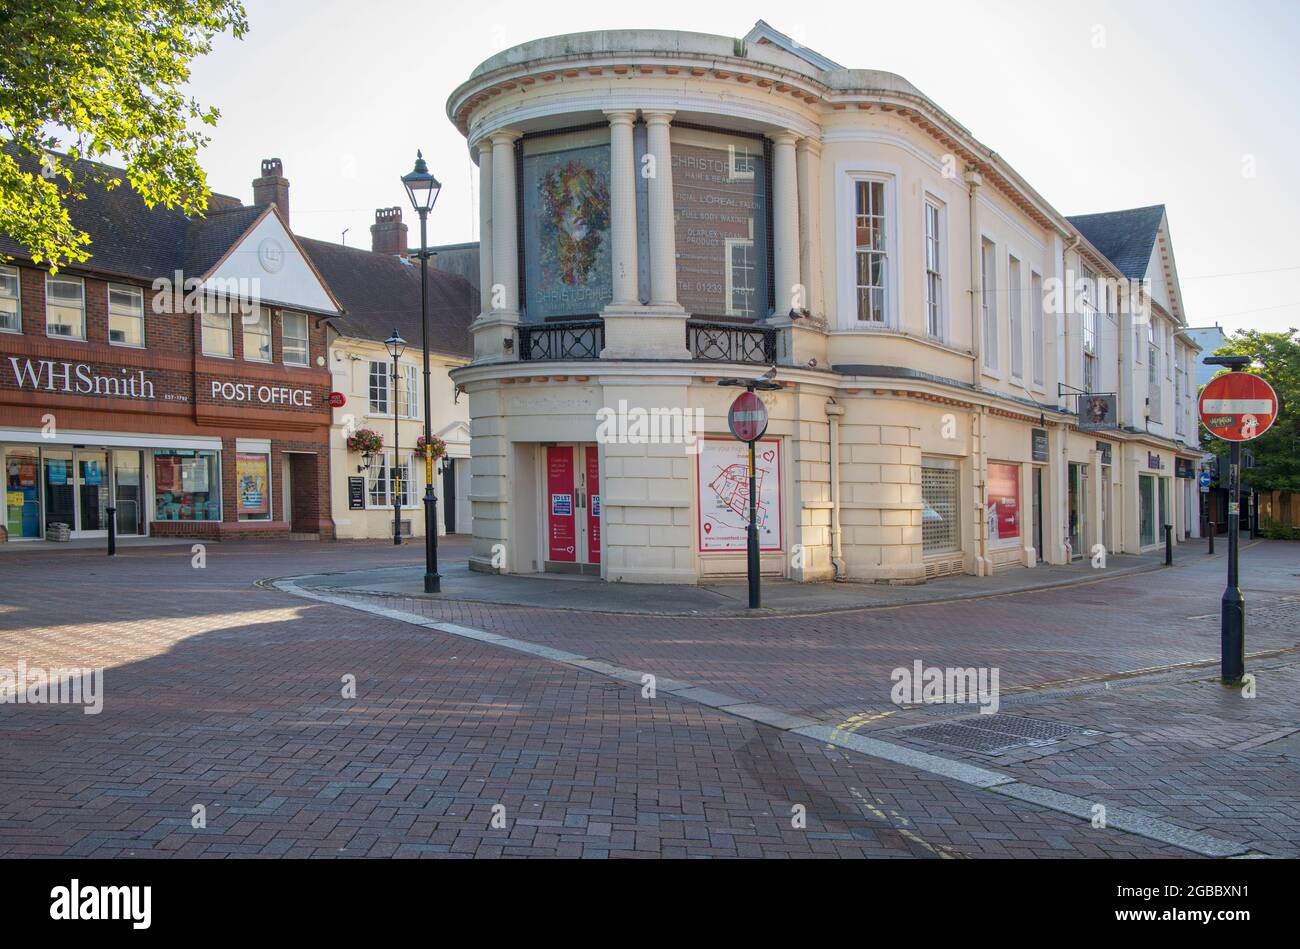 the high street and town centre in ashford kent Stock Photo